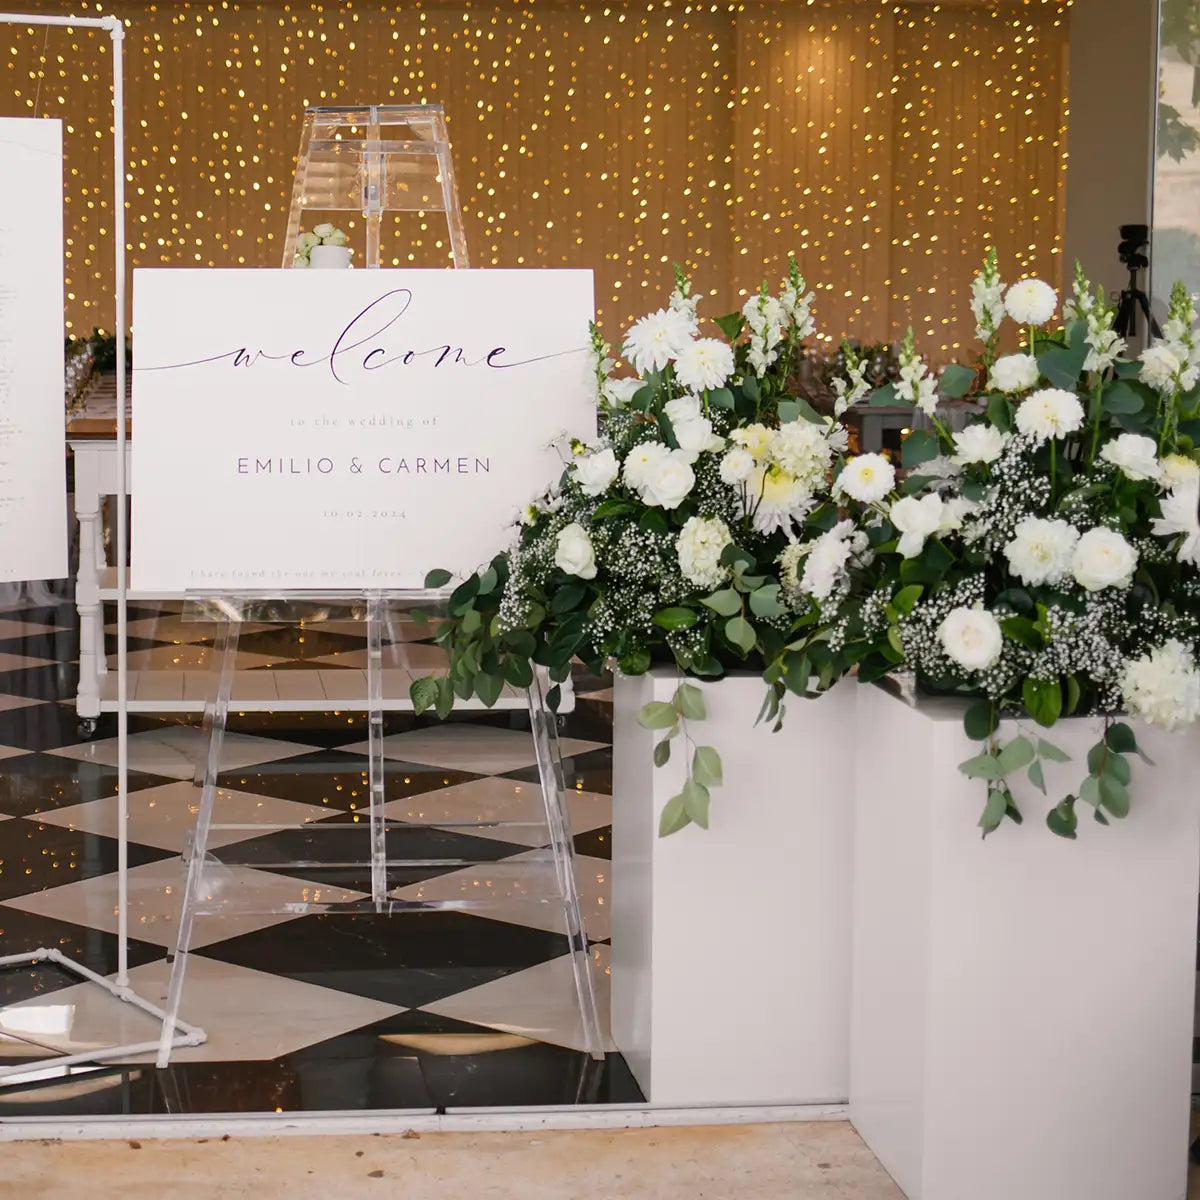 Chic wedding welcome sign for Emilio & Carmen with elegant white floral arrangements and greenery in white planters. Ideal for event decor. Fabulous Flowers and Gifts."